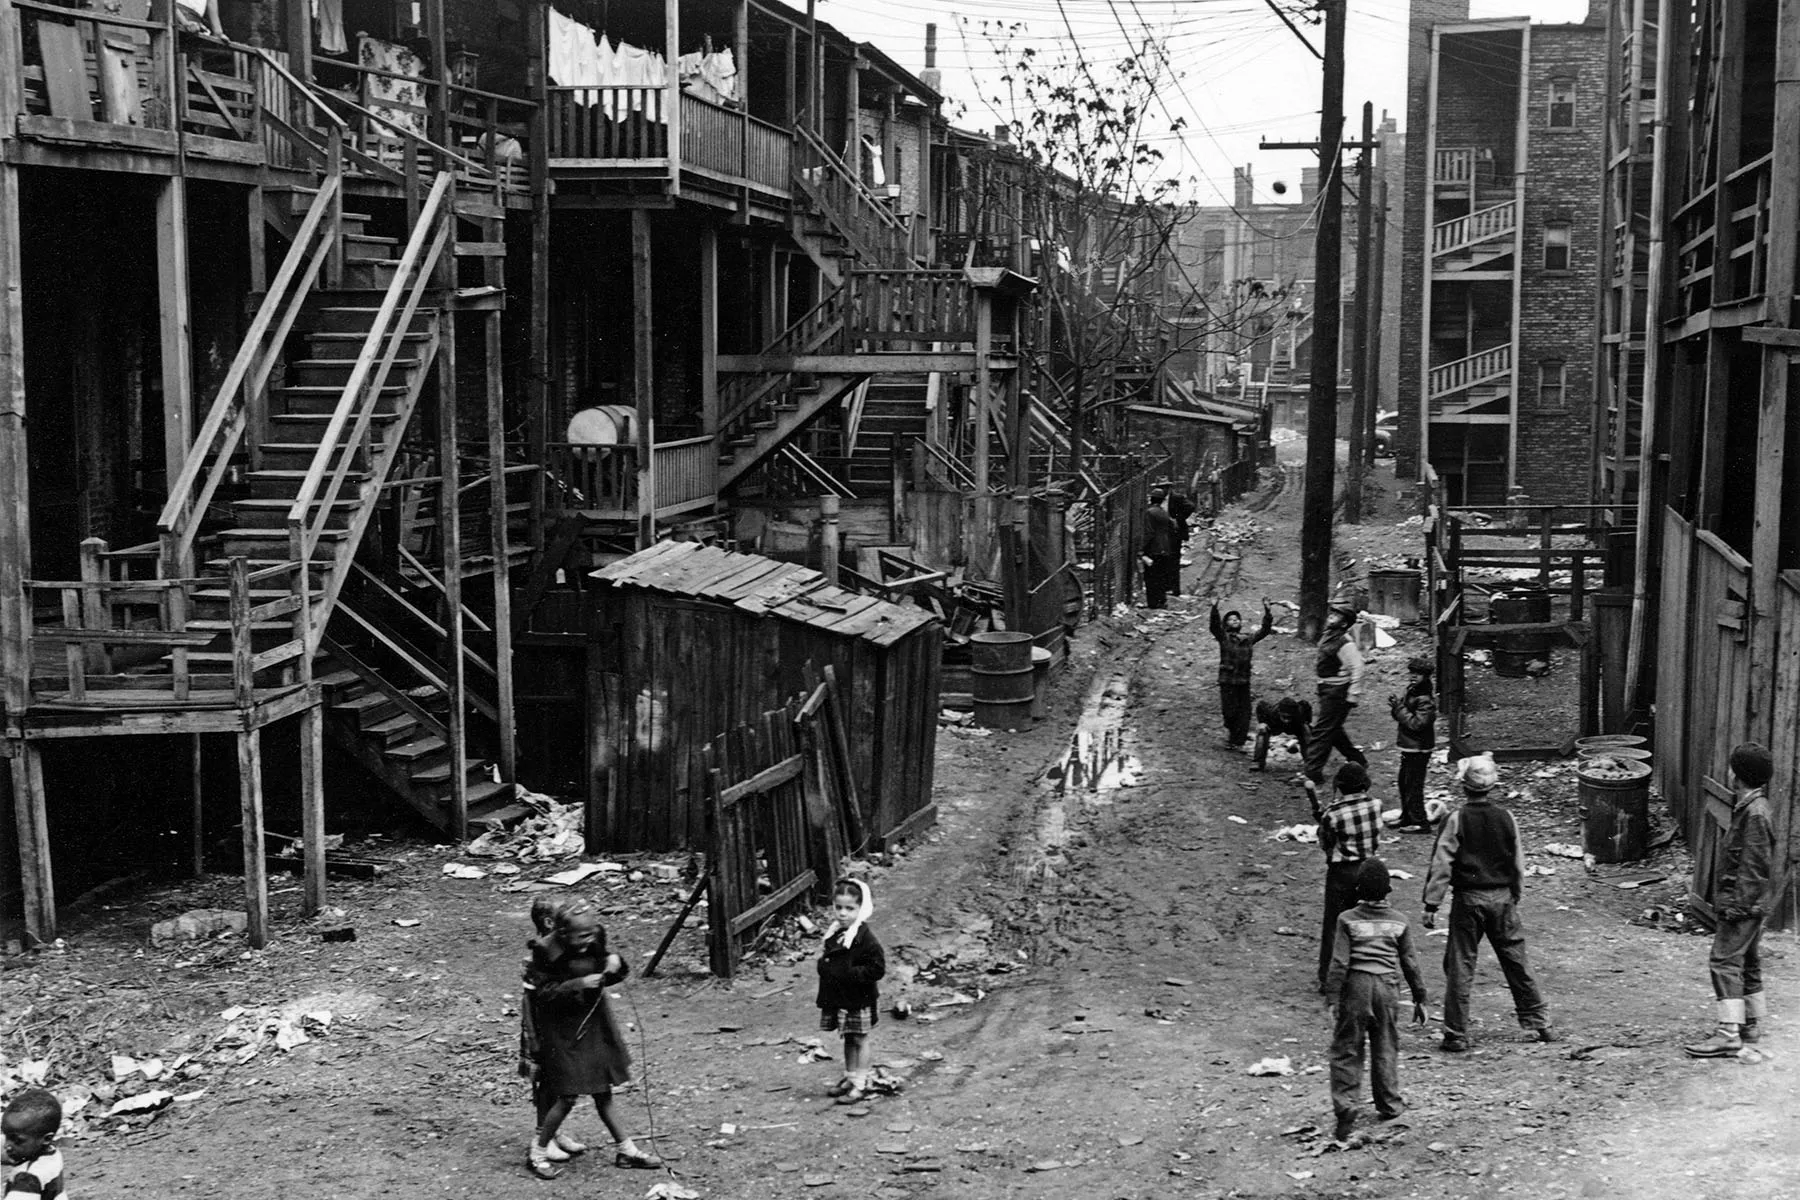 Children play in a muddy back street alley of Chicago's South Side in 1951.